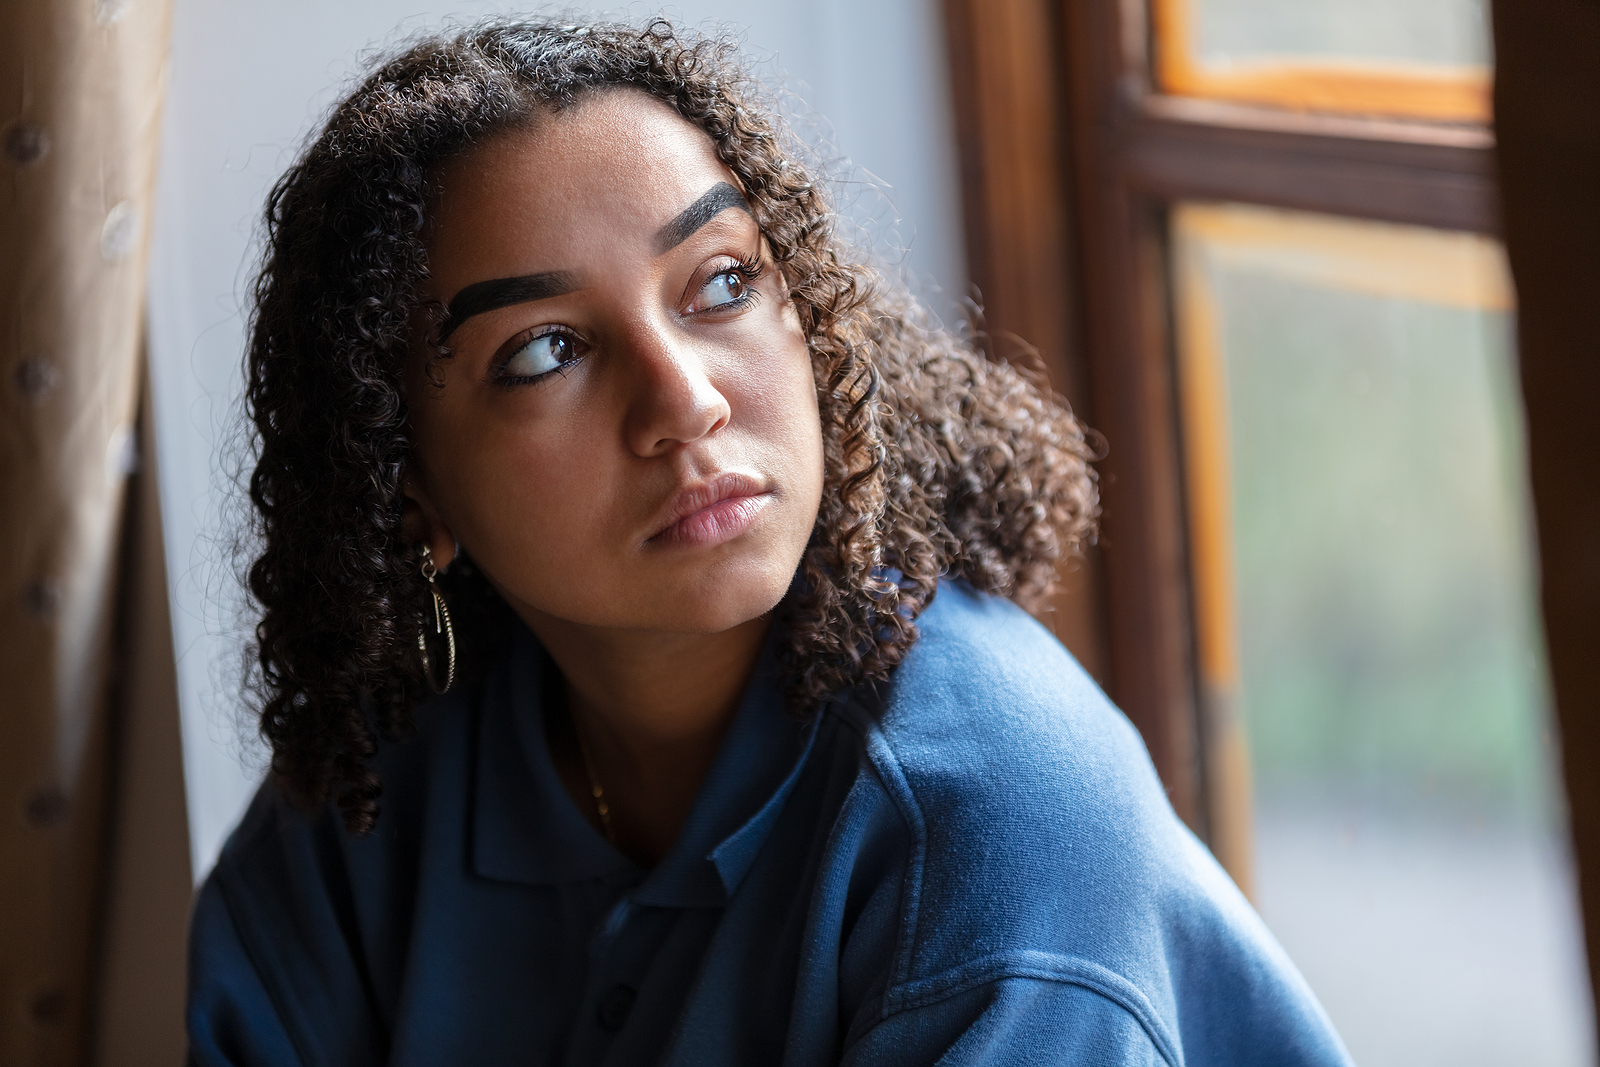 Beautiful mixed race African American girl teenager female young woman sad depressed or worried looking out of a window.